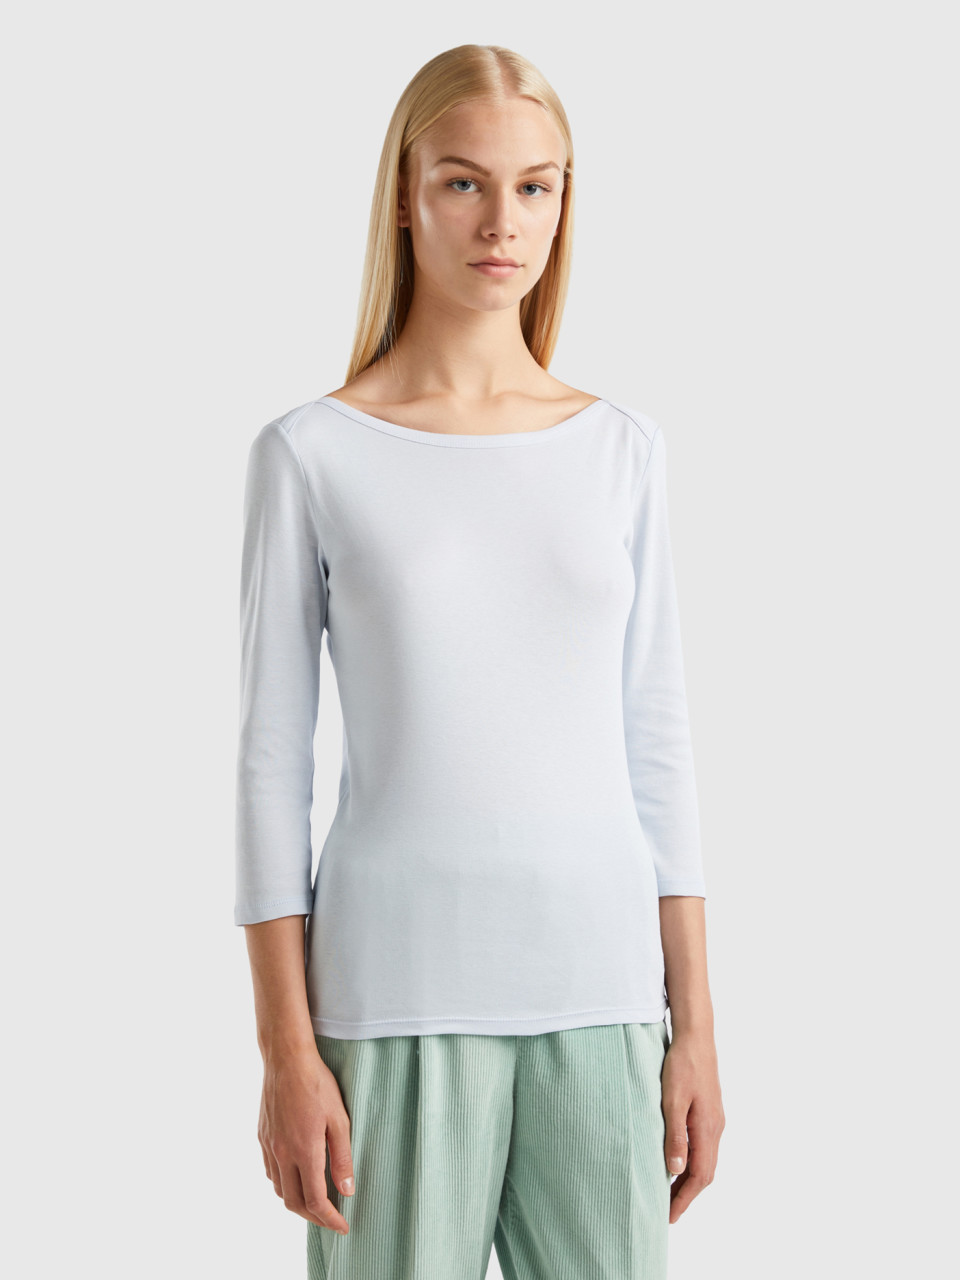 Benetton, T-shirt With Boat Neck In 100% Cotton, Sky Blue, Women